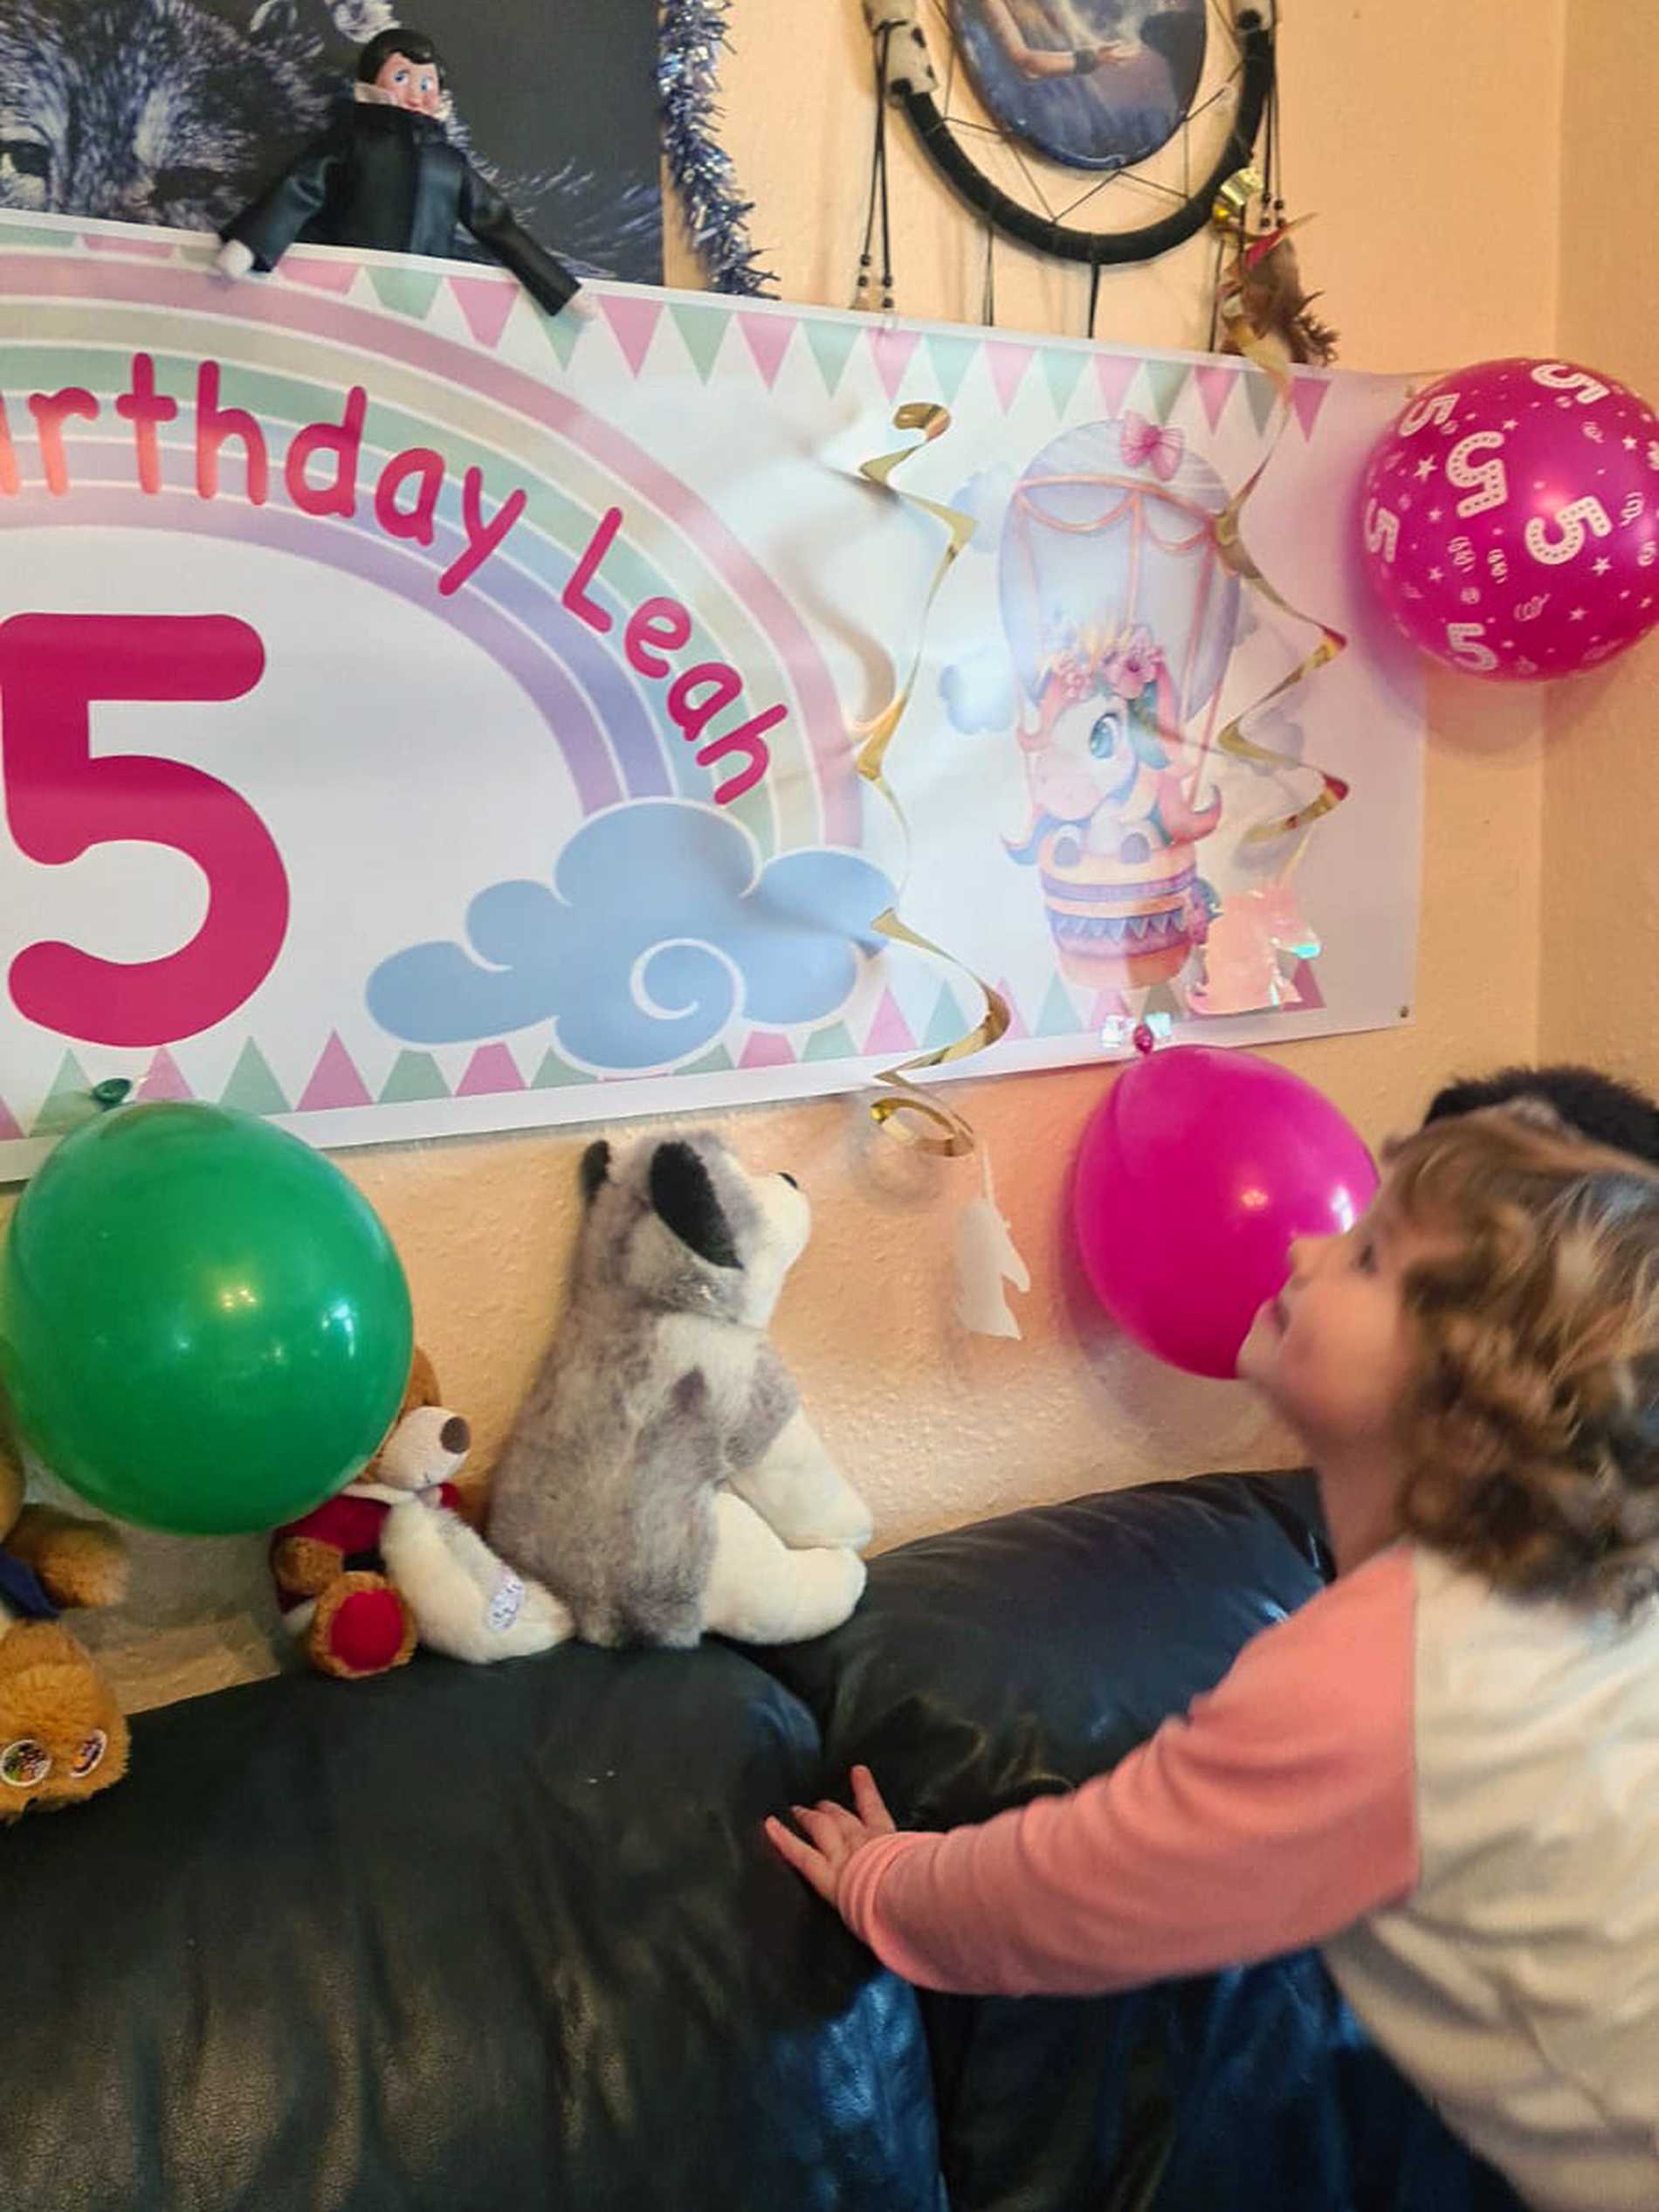 Leah leaning on the sofa, looking up at her 'happy birthday' banner.